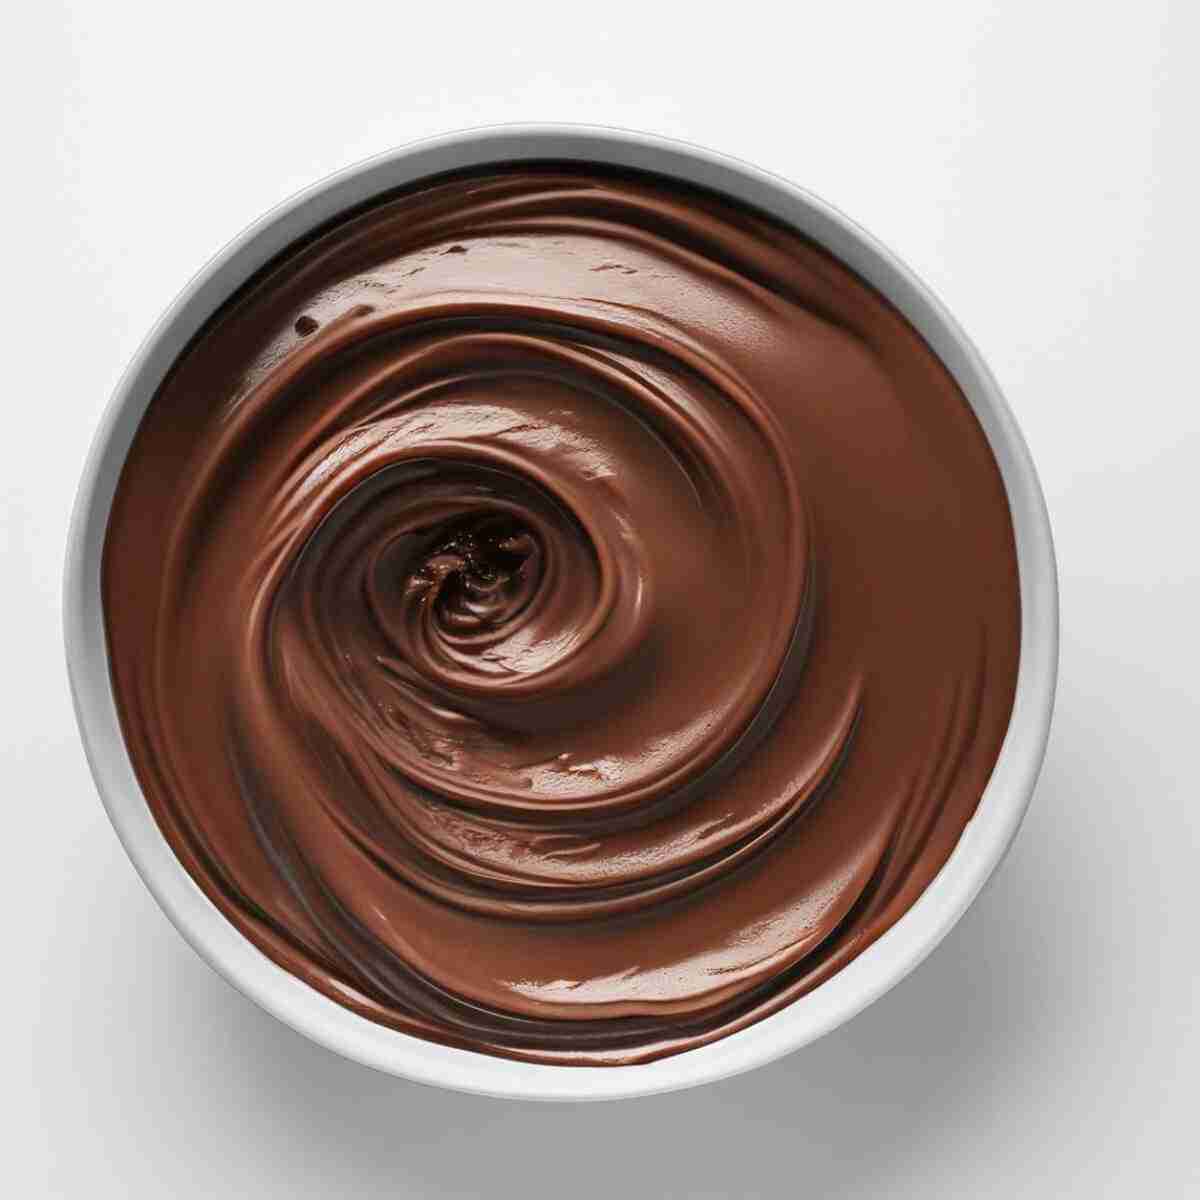 Vegan Buttercream Chocolate Frosting, also called chocolate avocado frosting in a bowl.